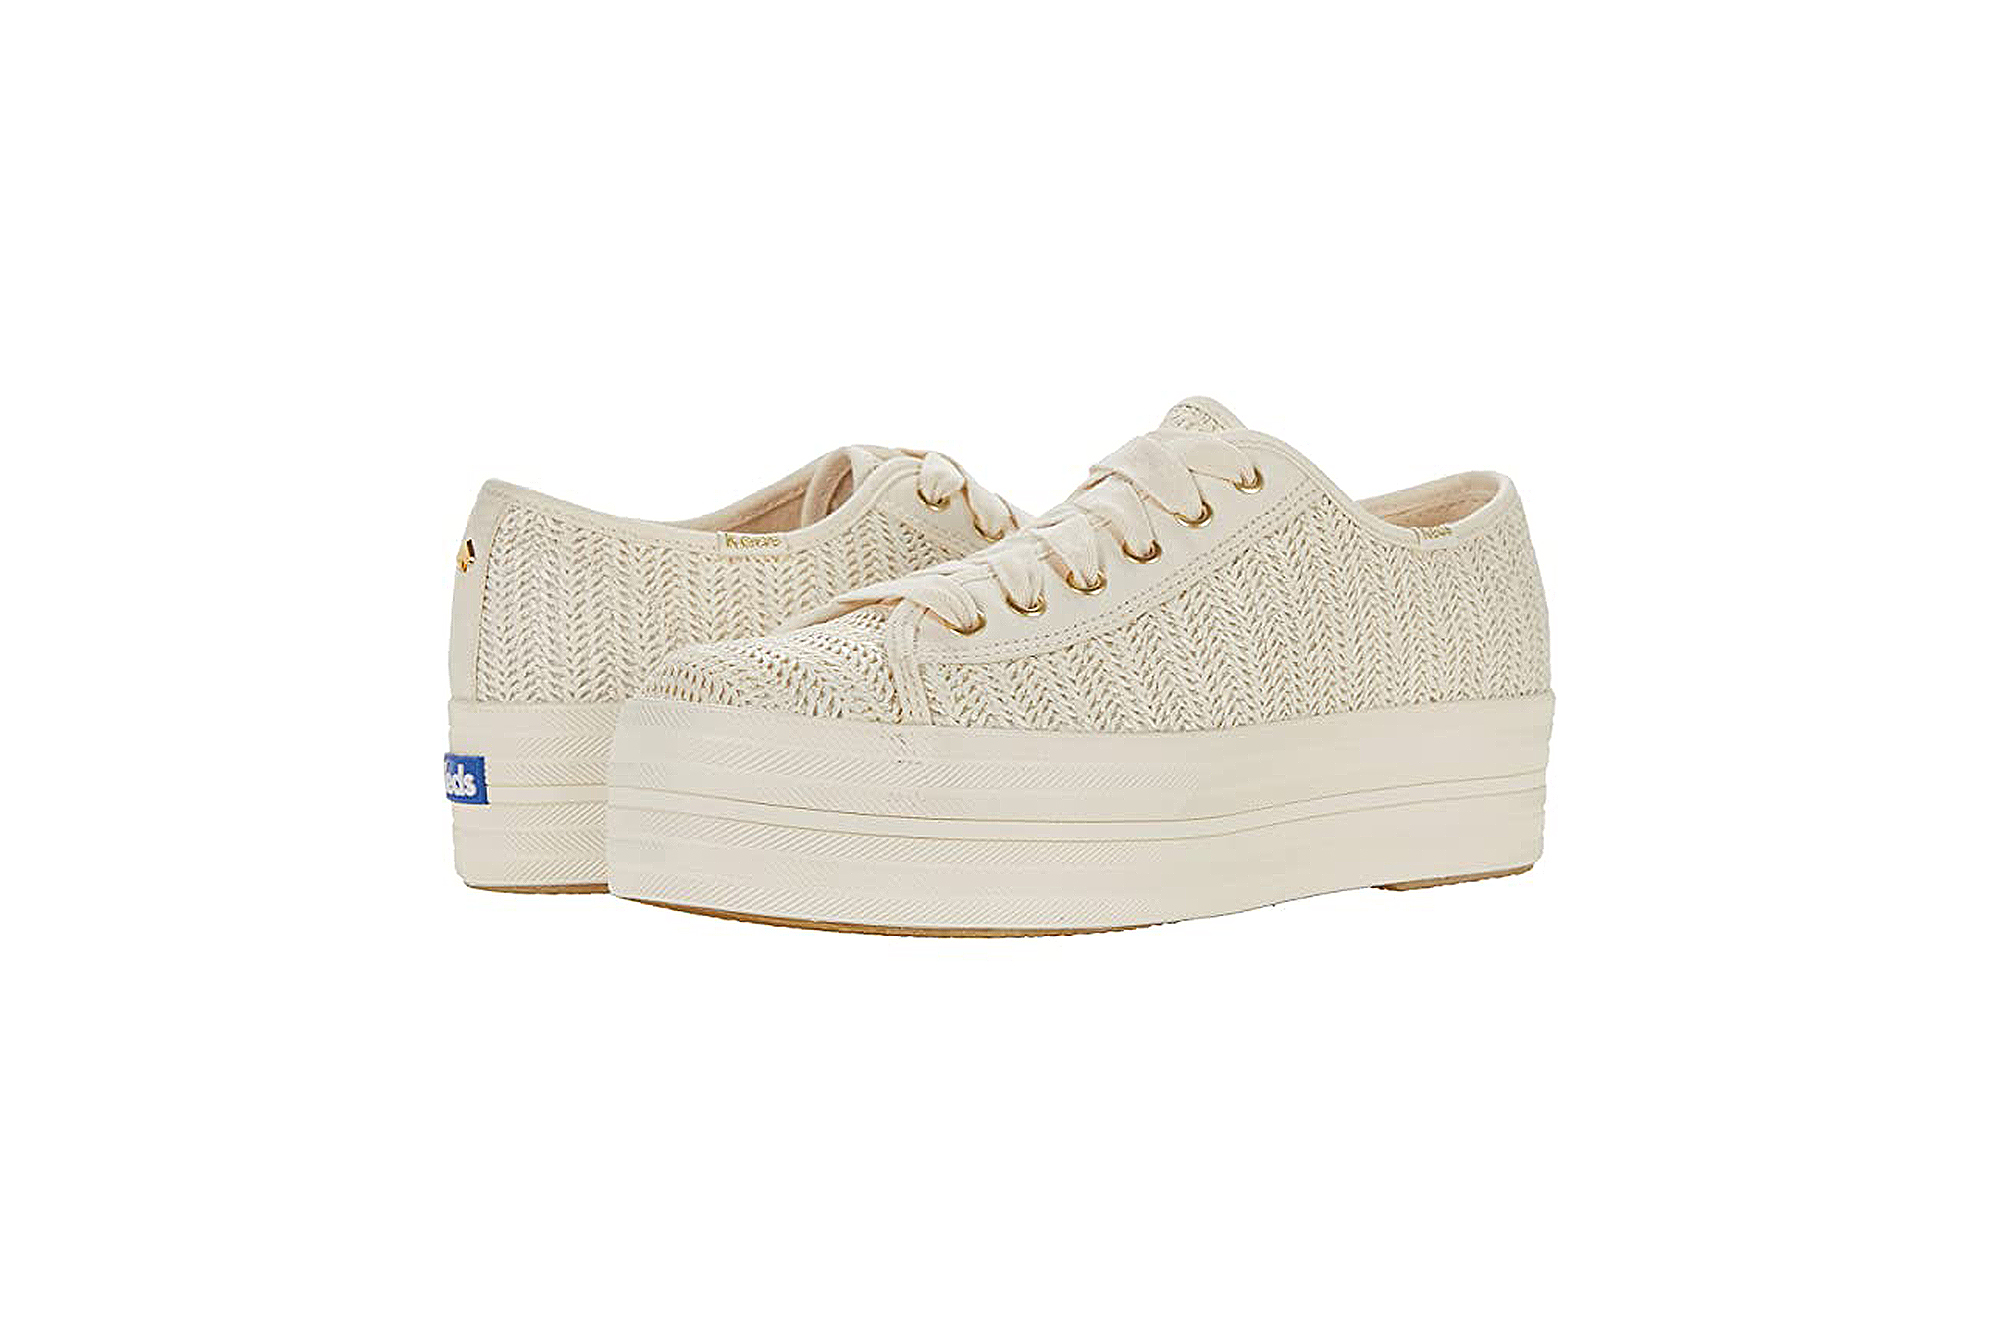 Keds X Kate Spade Shoes Are the Sneaker Version of Espadrilles